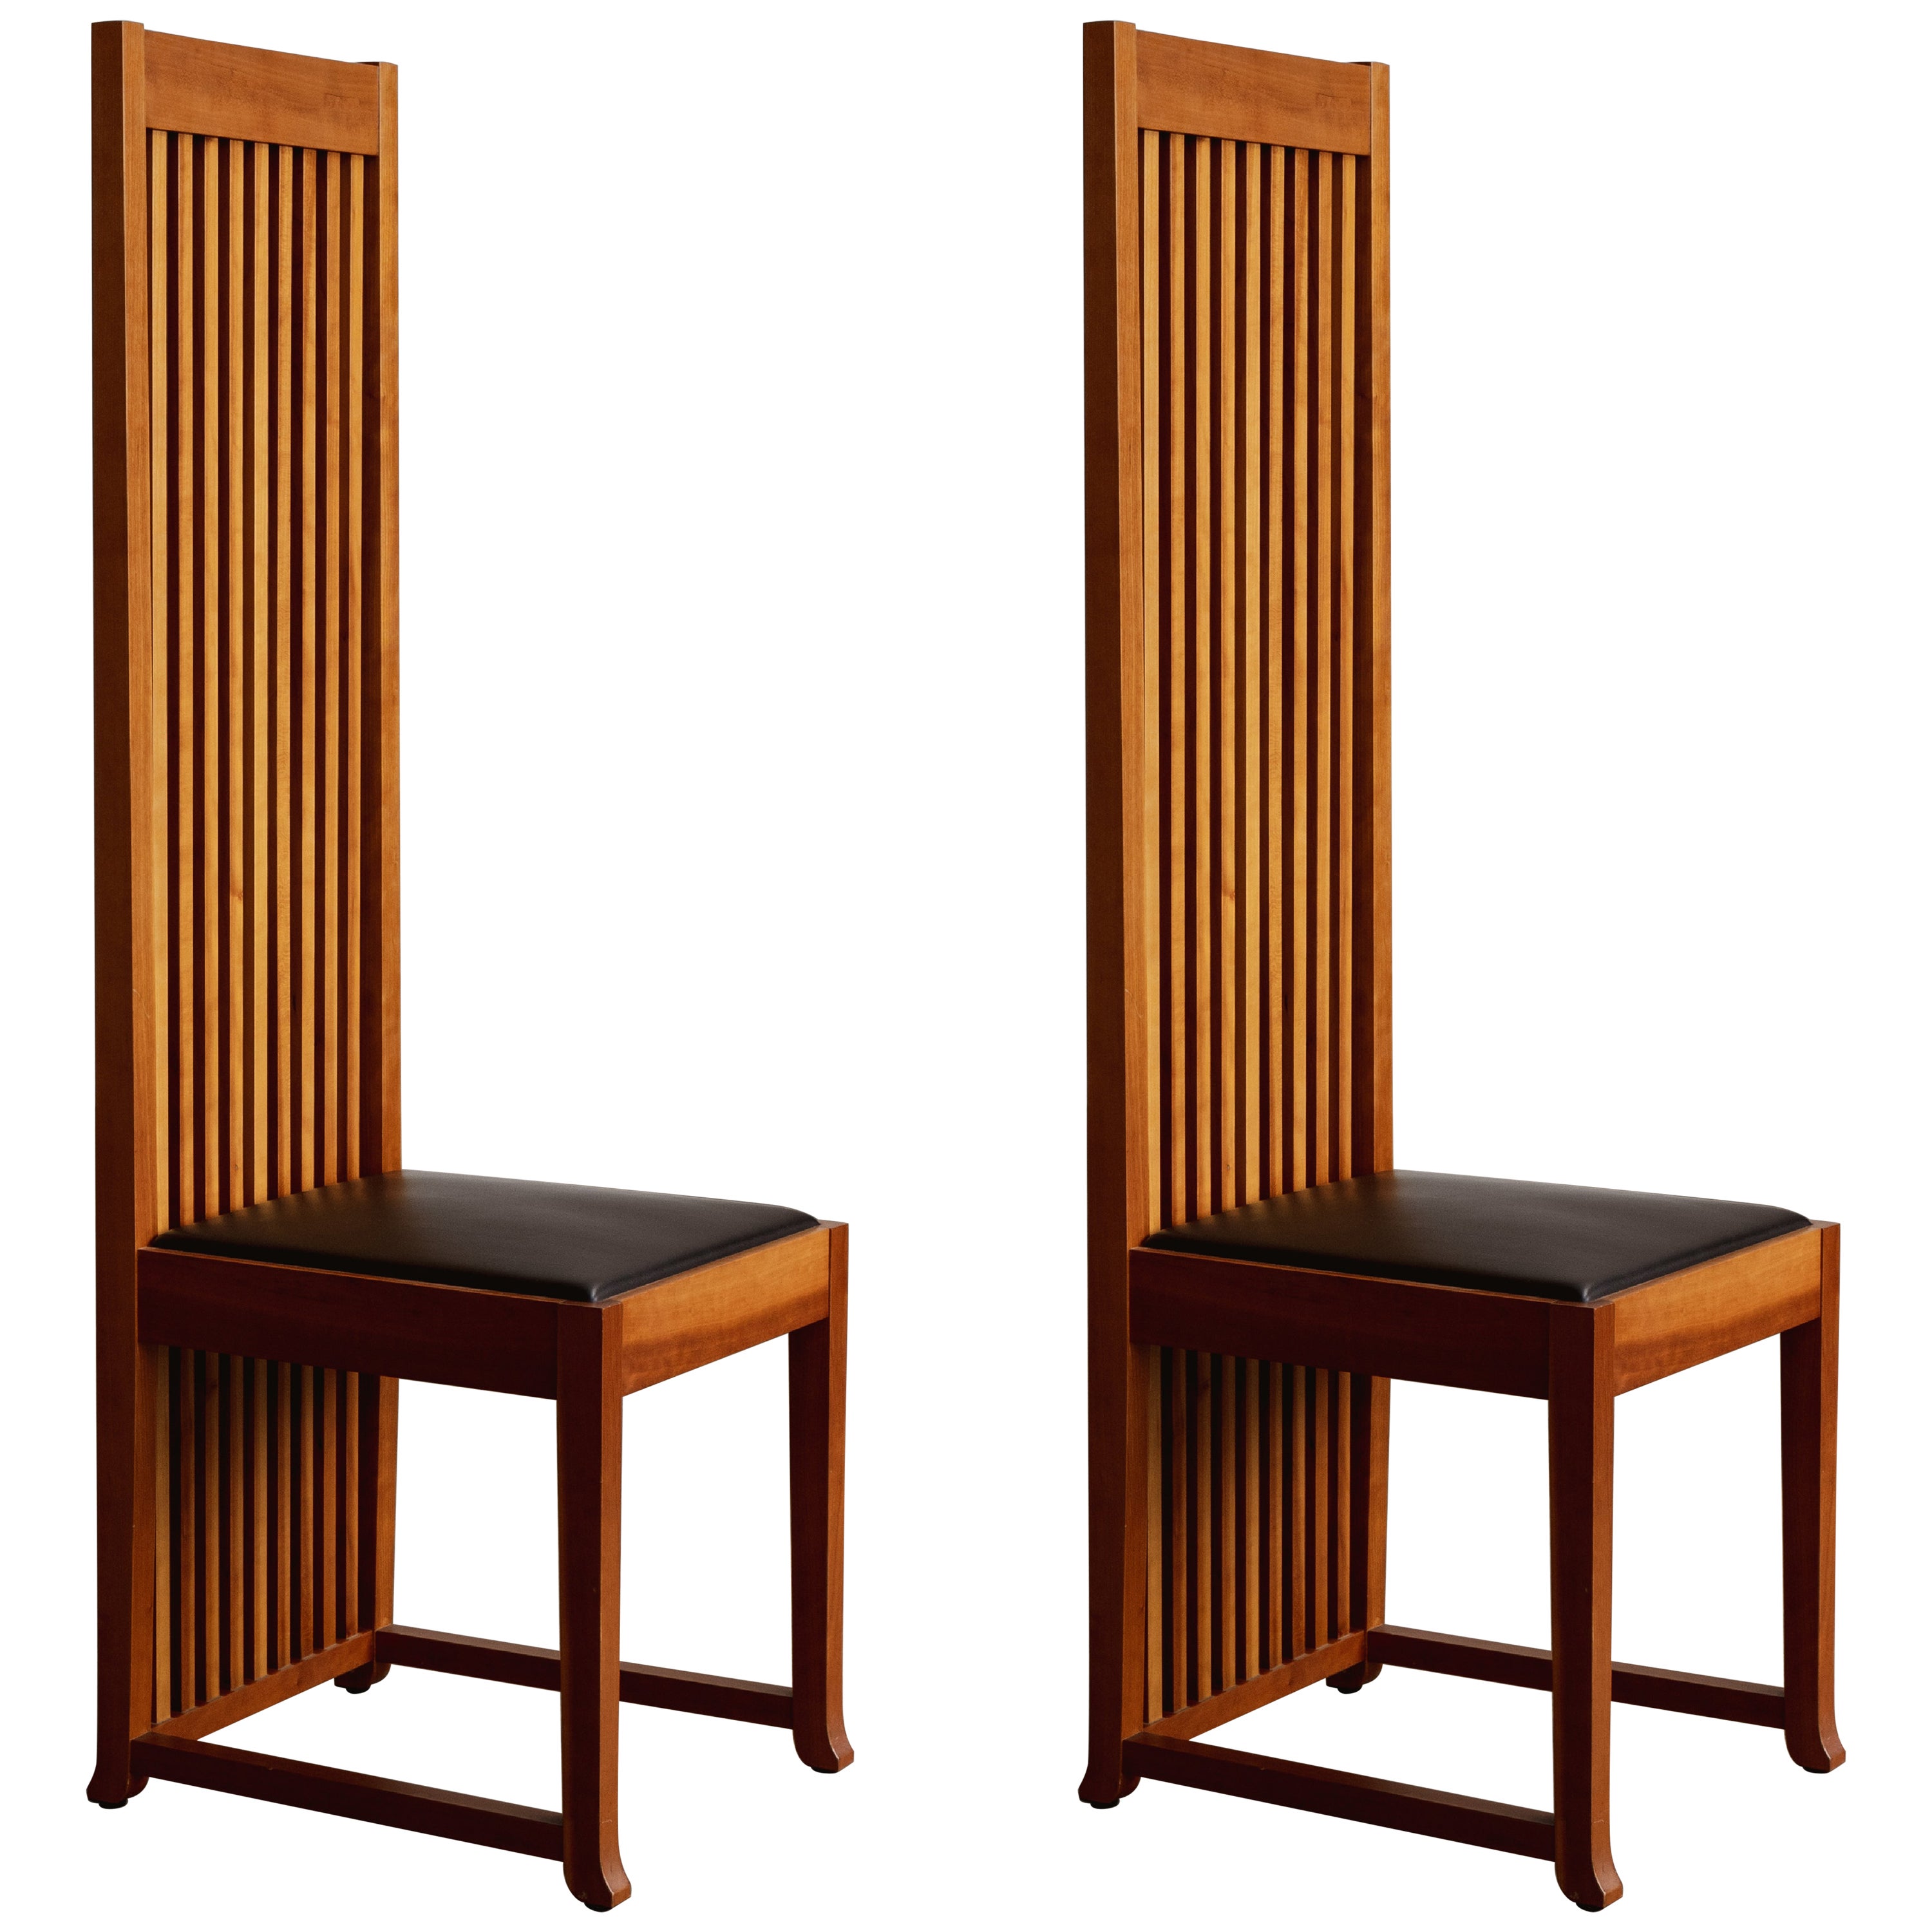 What style of furniture did Frank Lloyd Wright use?